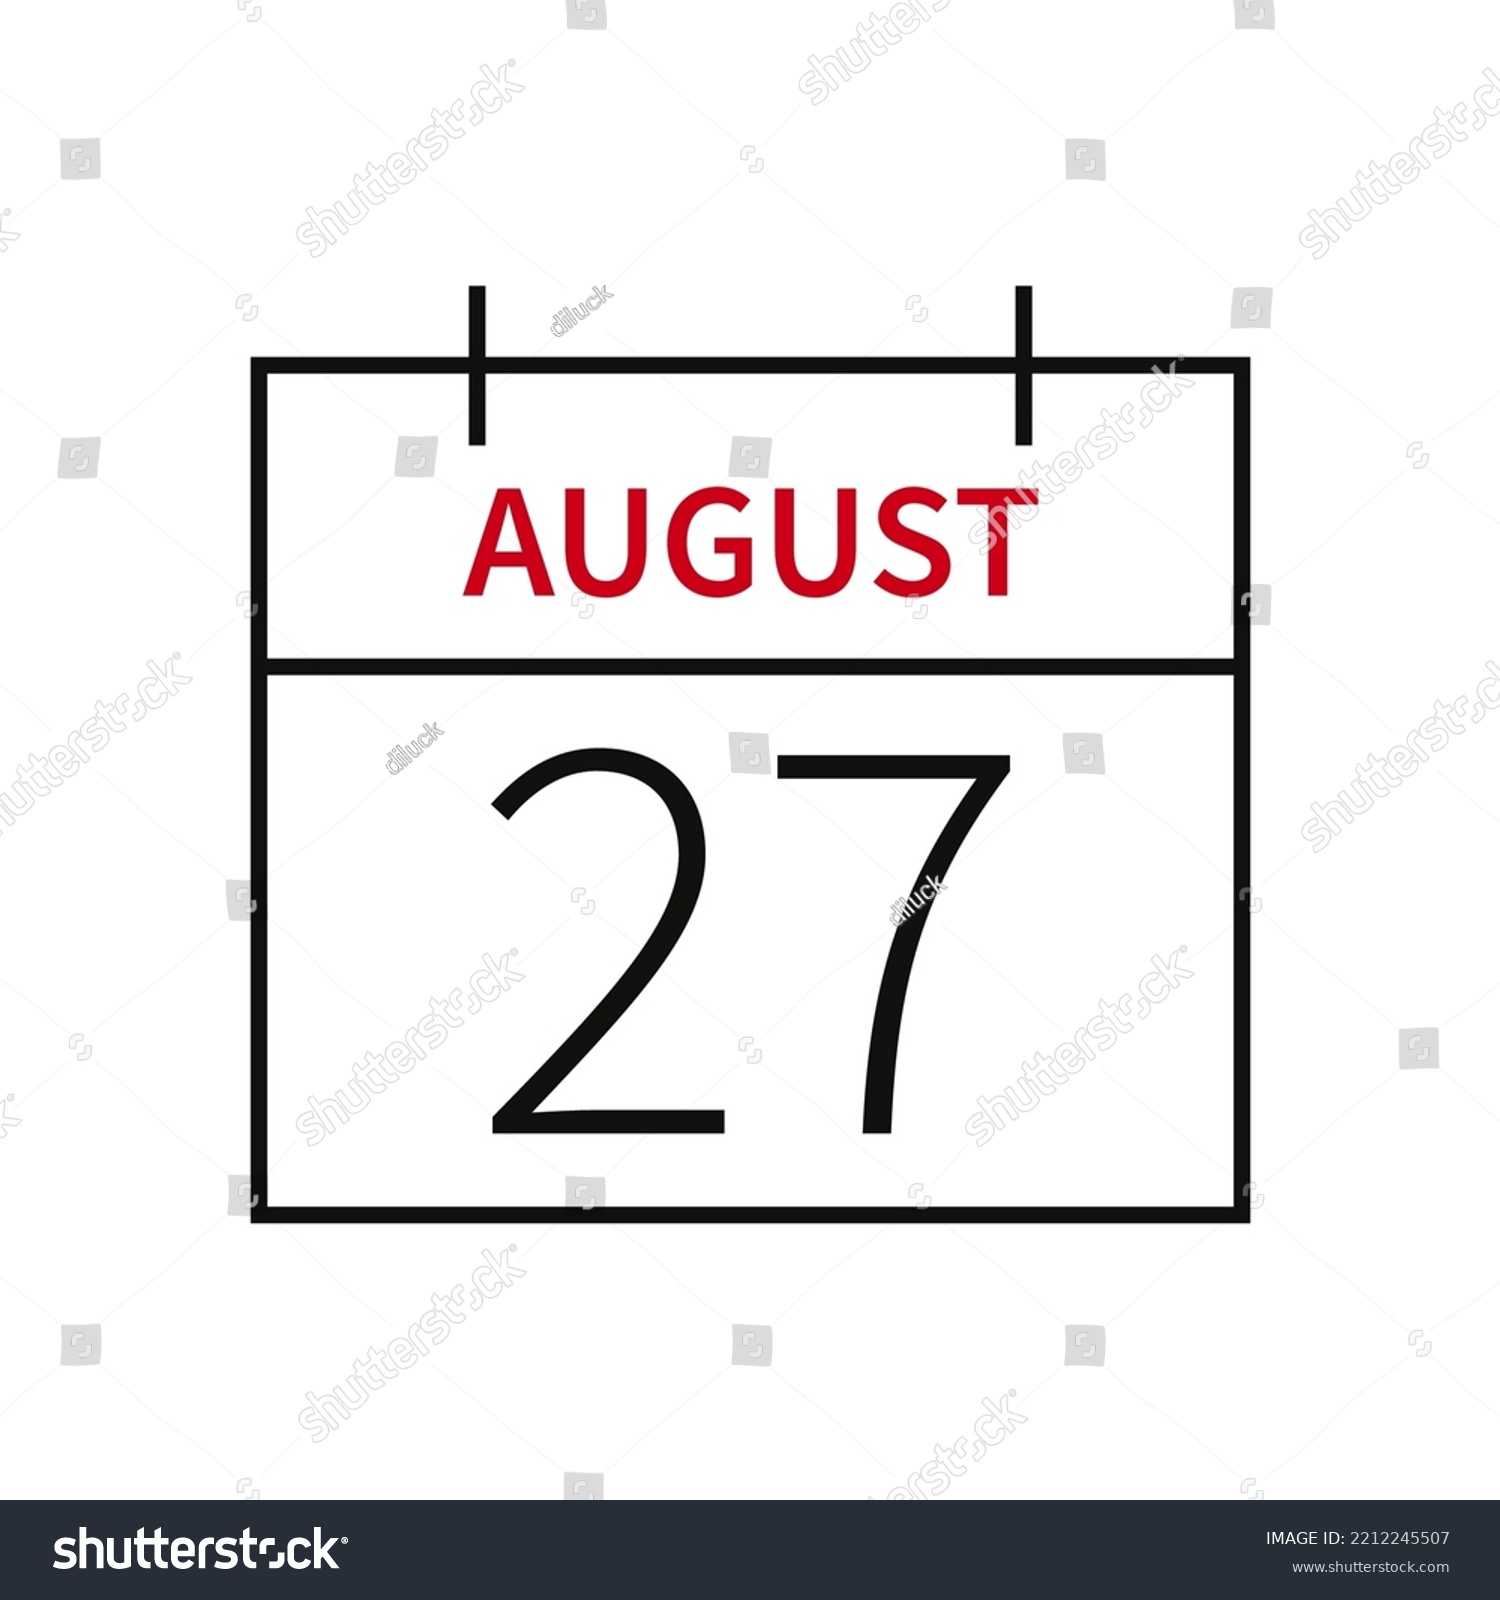 SVG of Calendar with date 27 august, line icon month name and date. Flat vector illustration for UI graphic design. svg